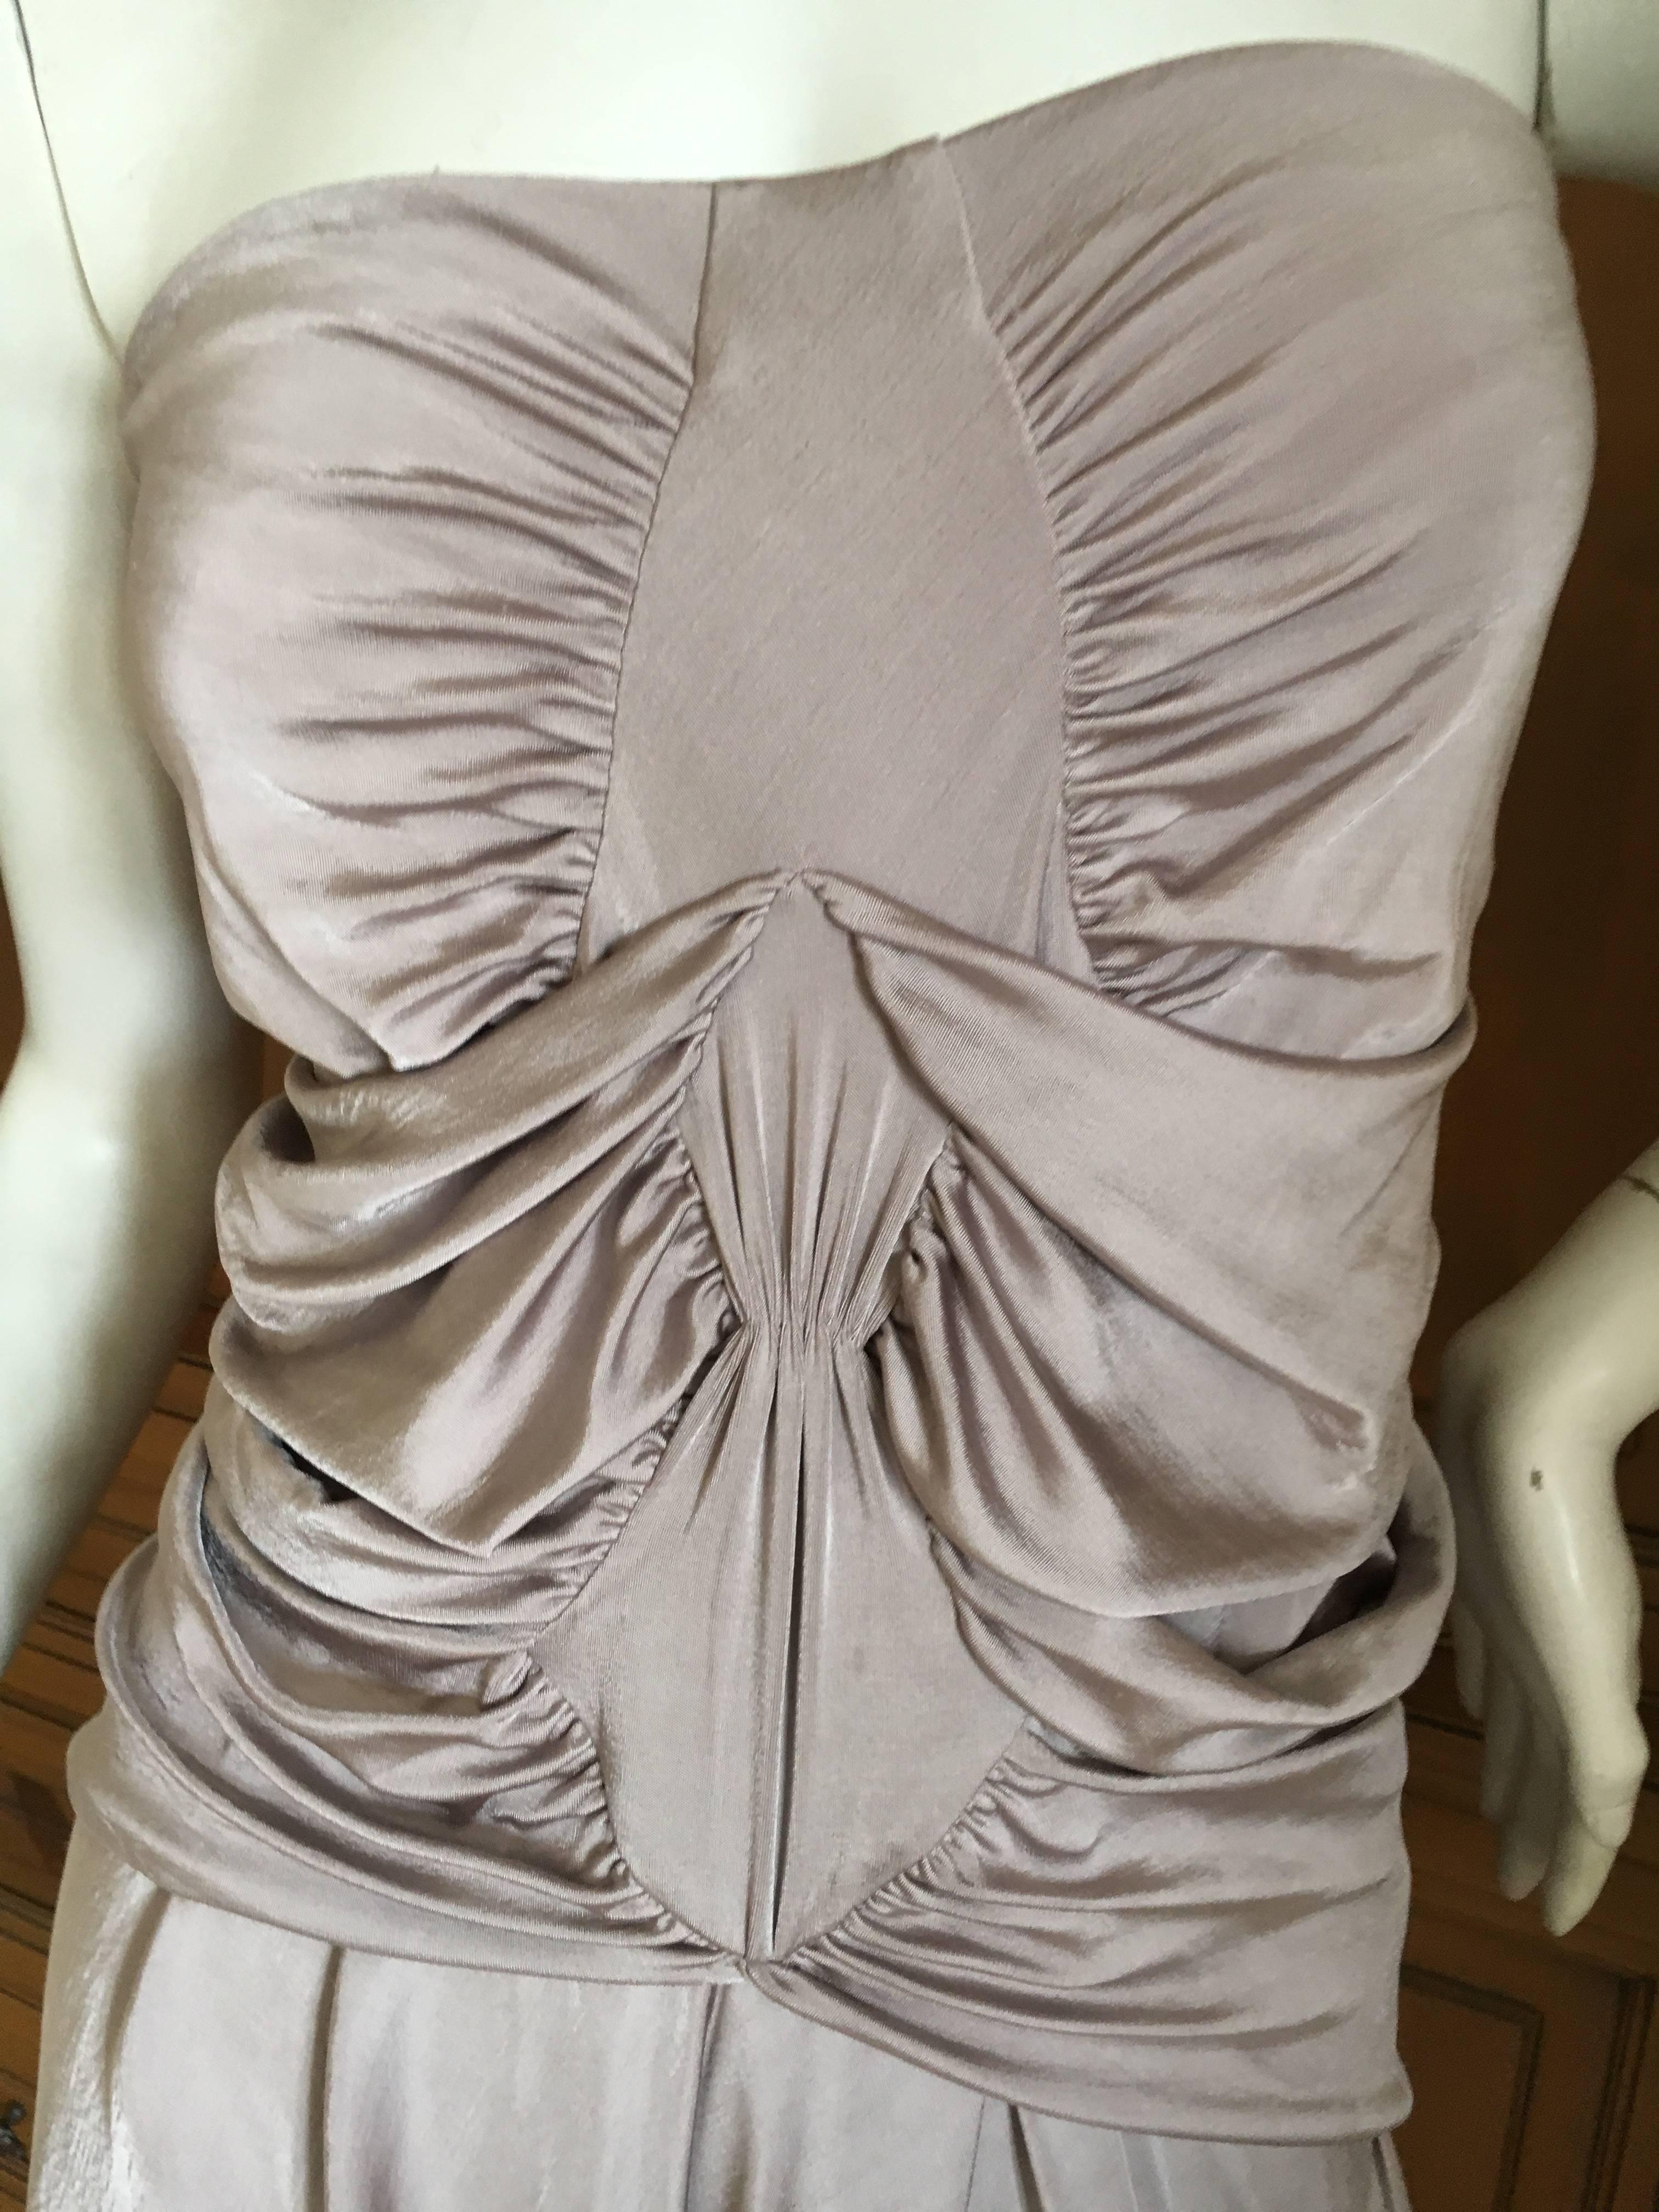 Yves Saint Laurent by Tom Ford 2002 Gray Ruched Dress In Excellent Condition For Sale In Cloverdale, CA